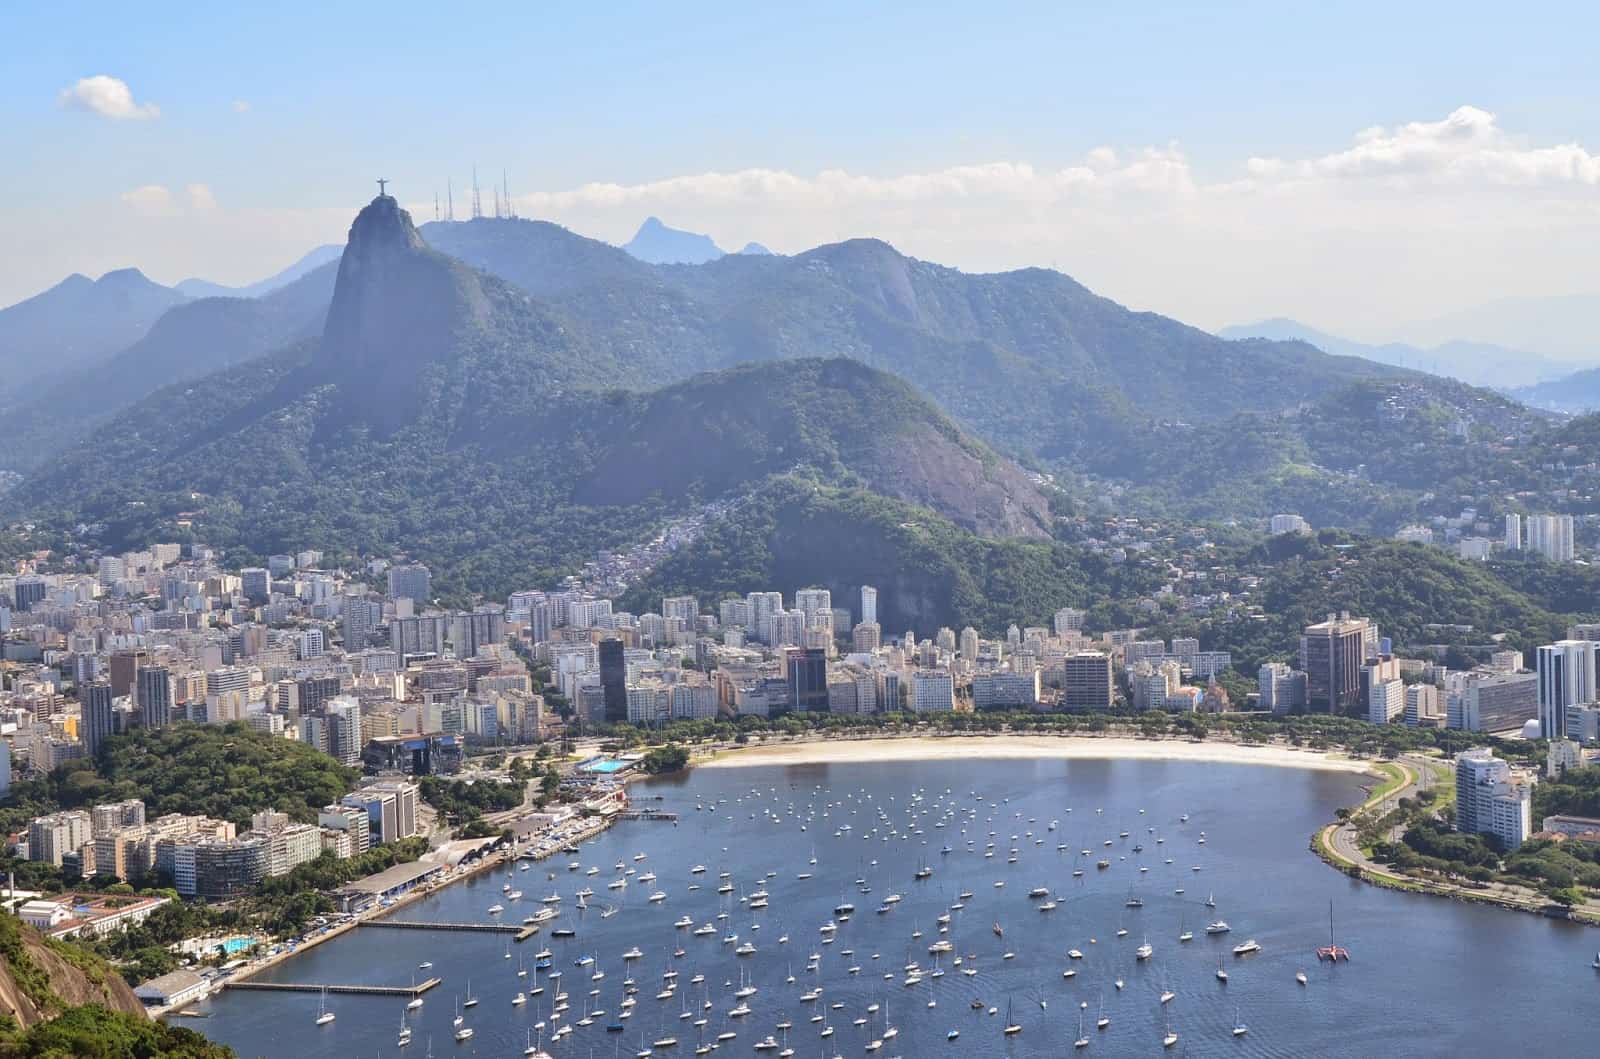 View of Botafogo from Sugarloaf Mountain in Rio de Janeiro, Brazil